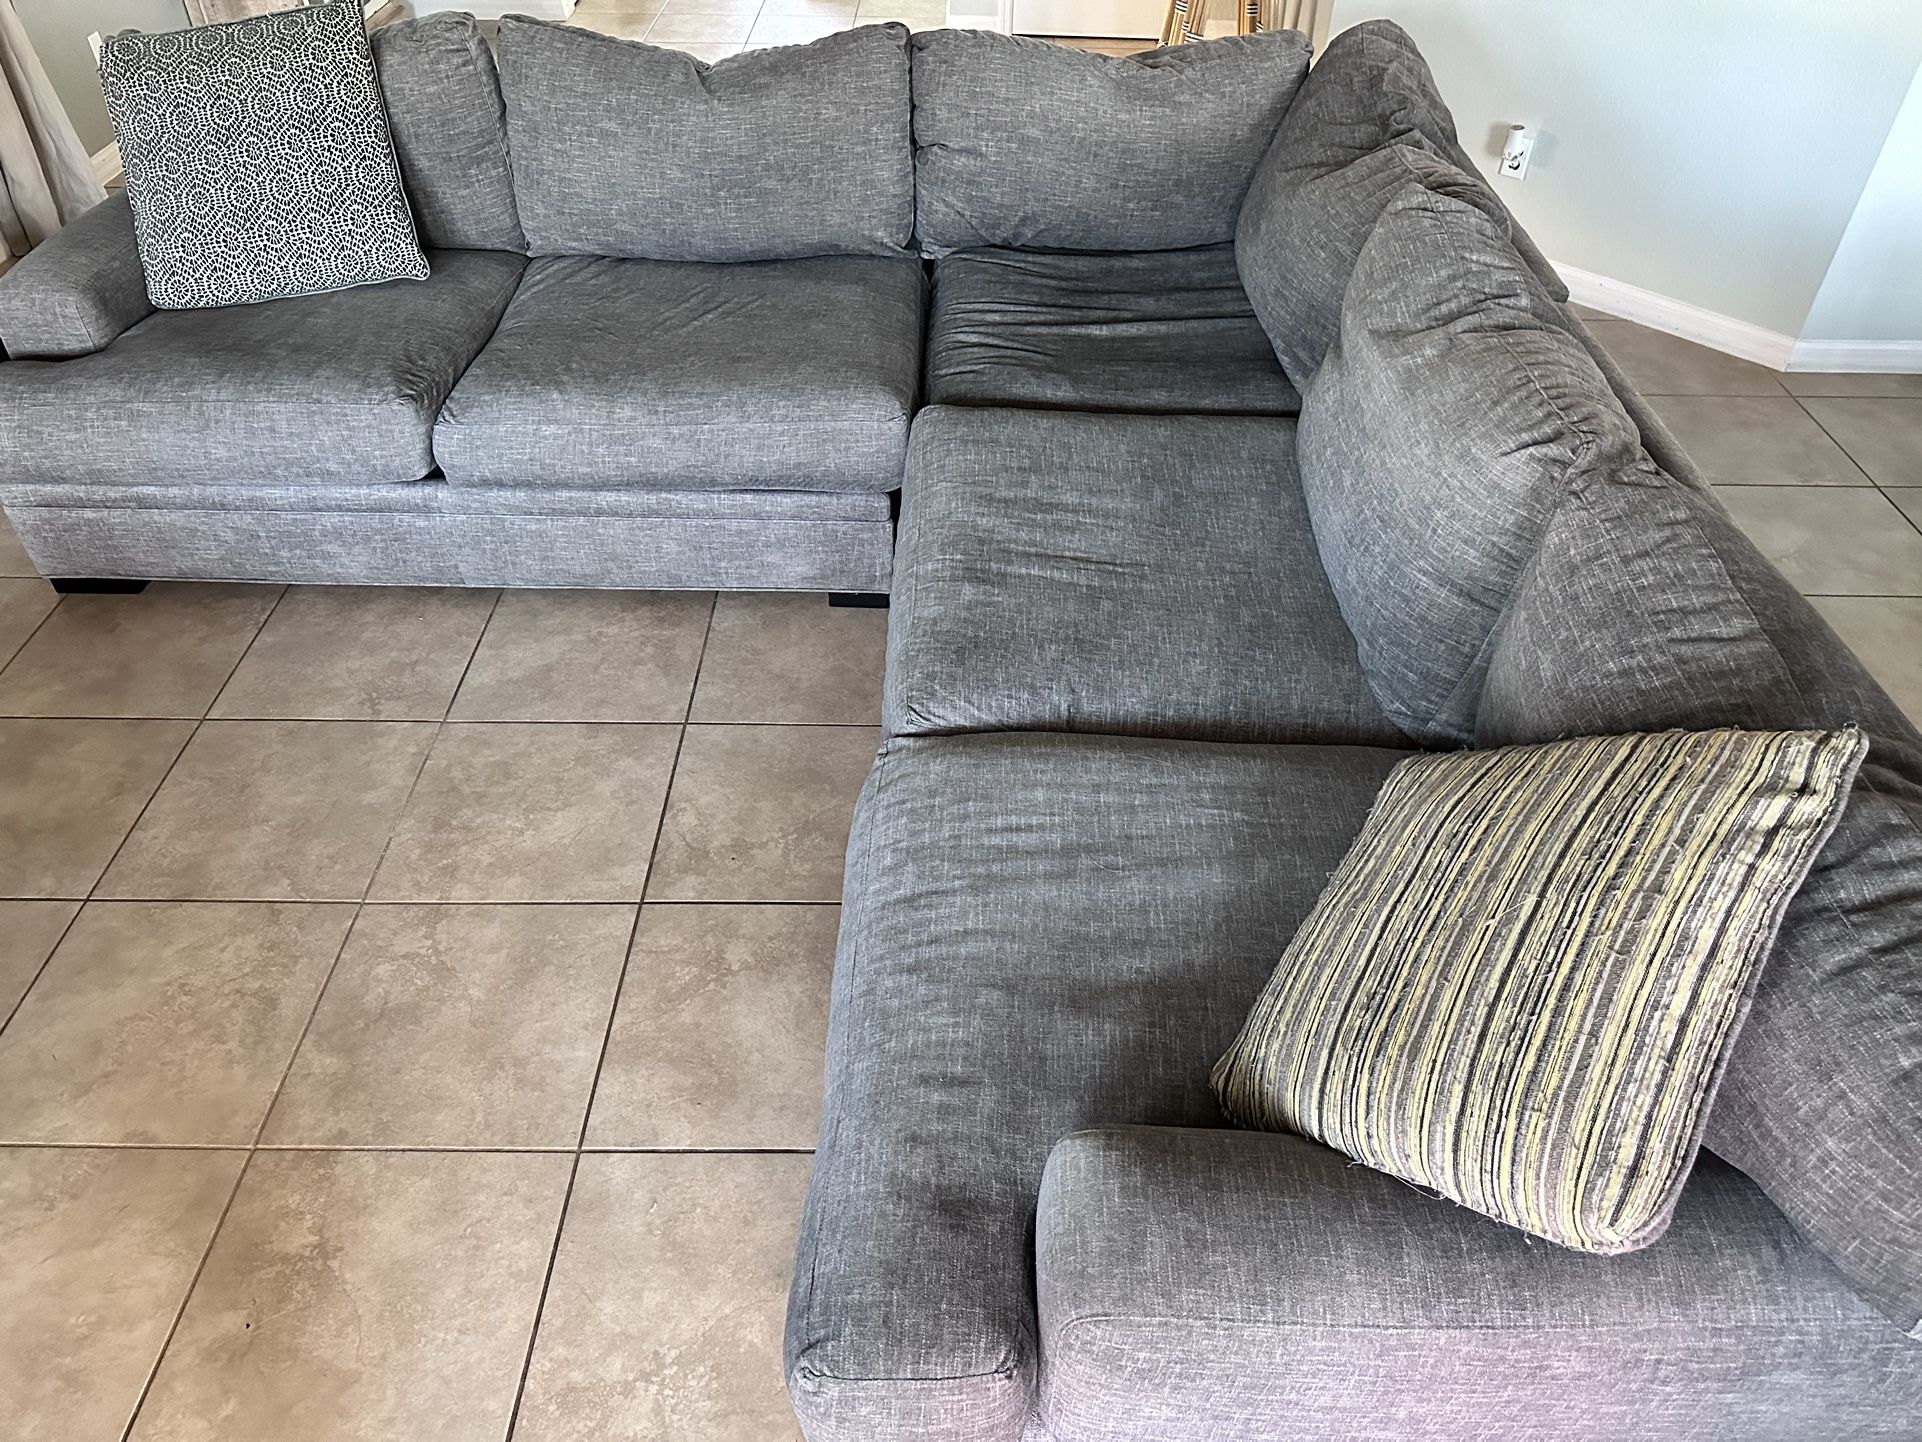 Sectional Couch $600 / OBO